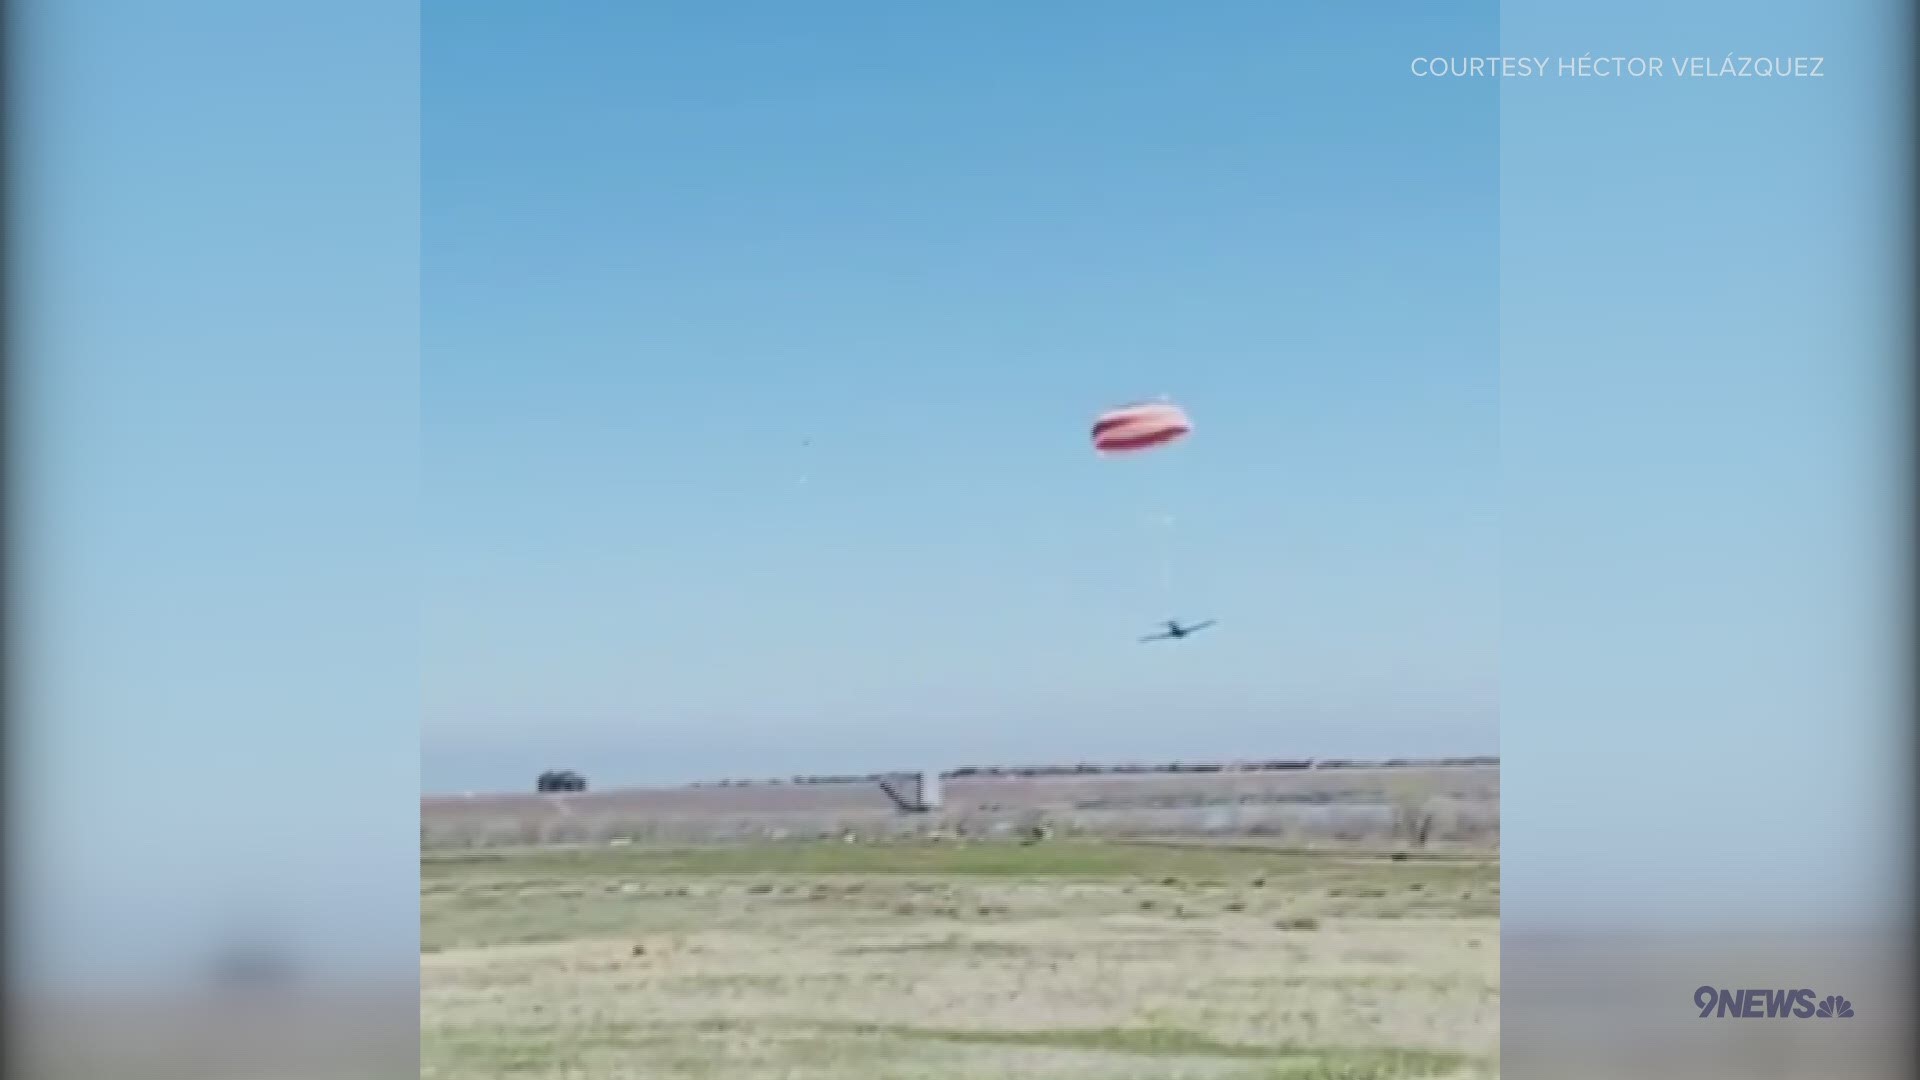 Video shows a Cirrus SR-22 making a landing with its parachute deployed following a mid-air collision with another plane near Cherry Creek Reservoir.